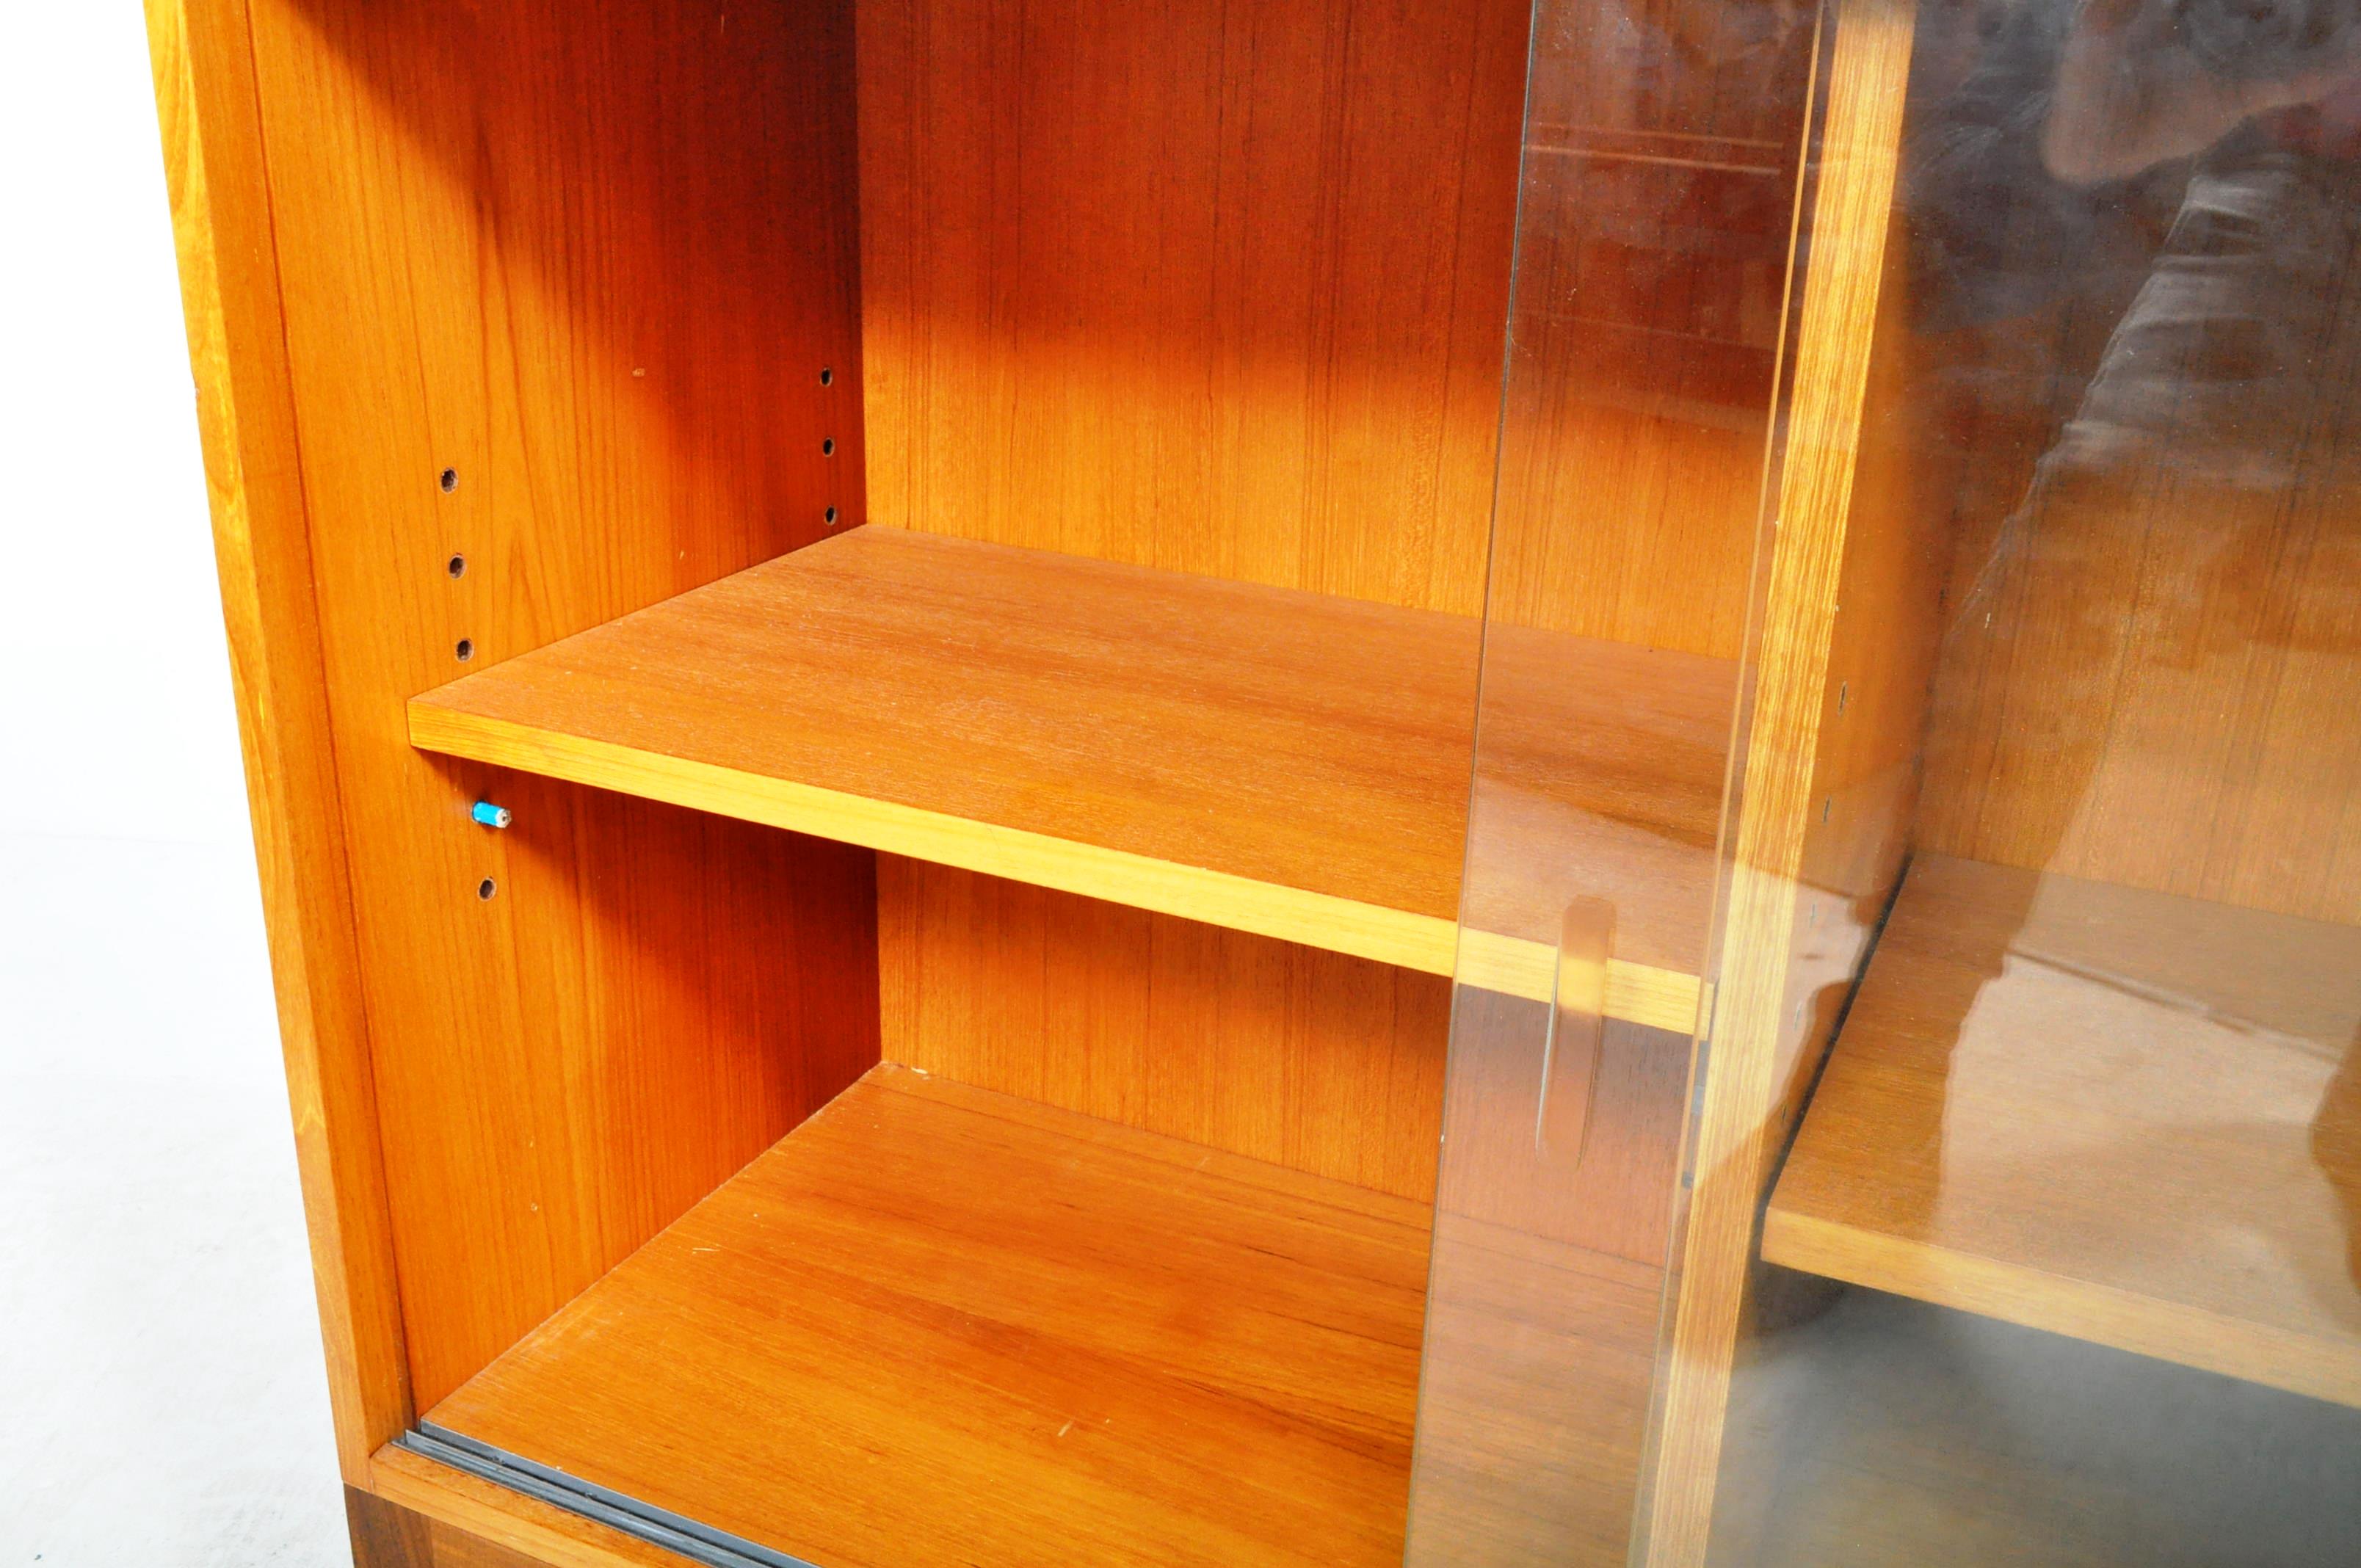 OFFICE FURNITURE - GOLD OAK BOOKCASE / DISPLAY CABINET - Image 4 of 5